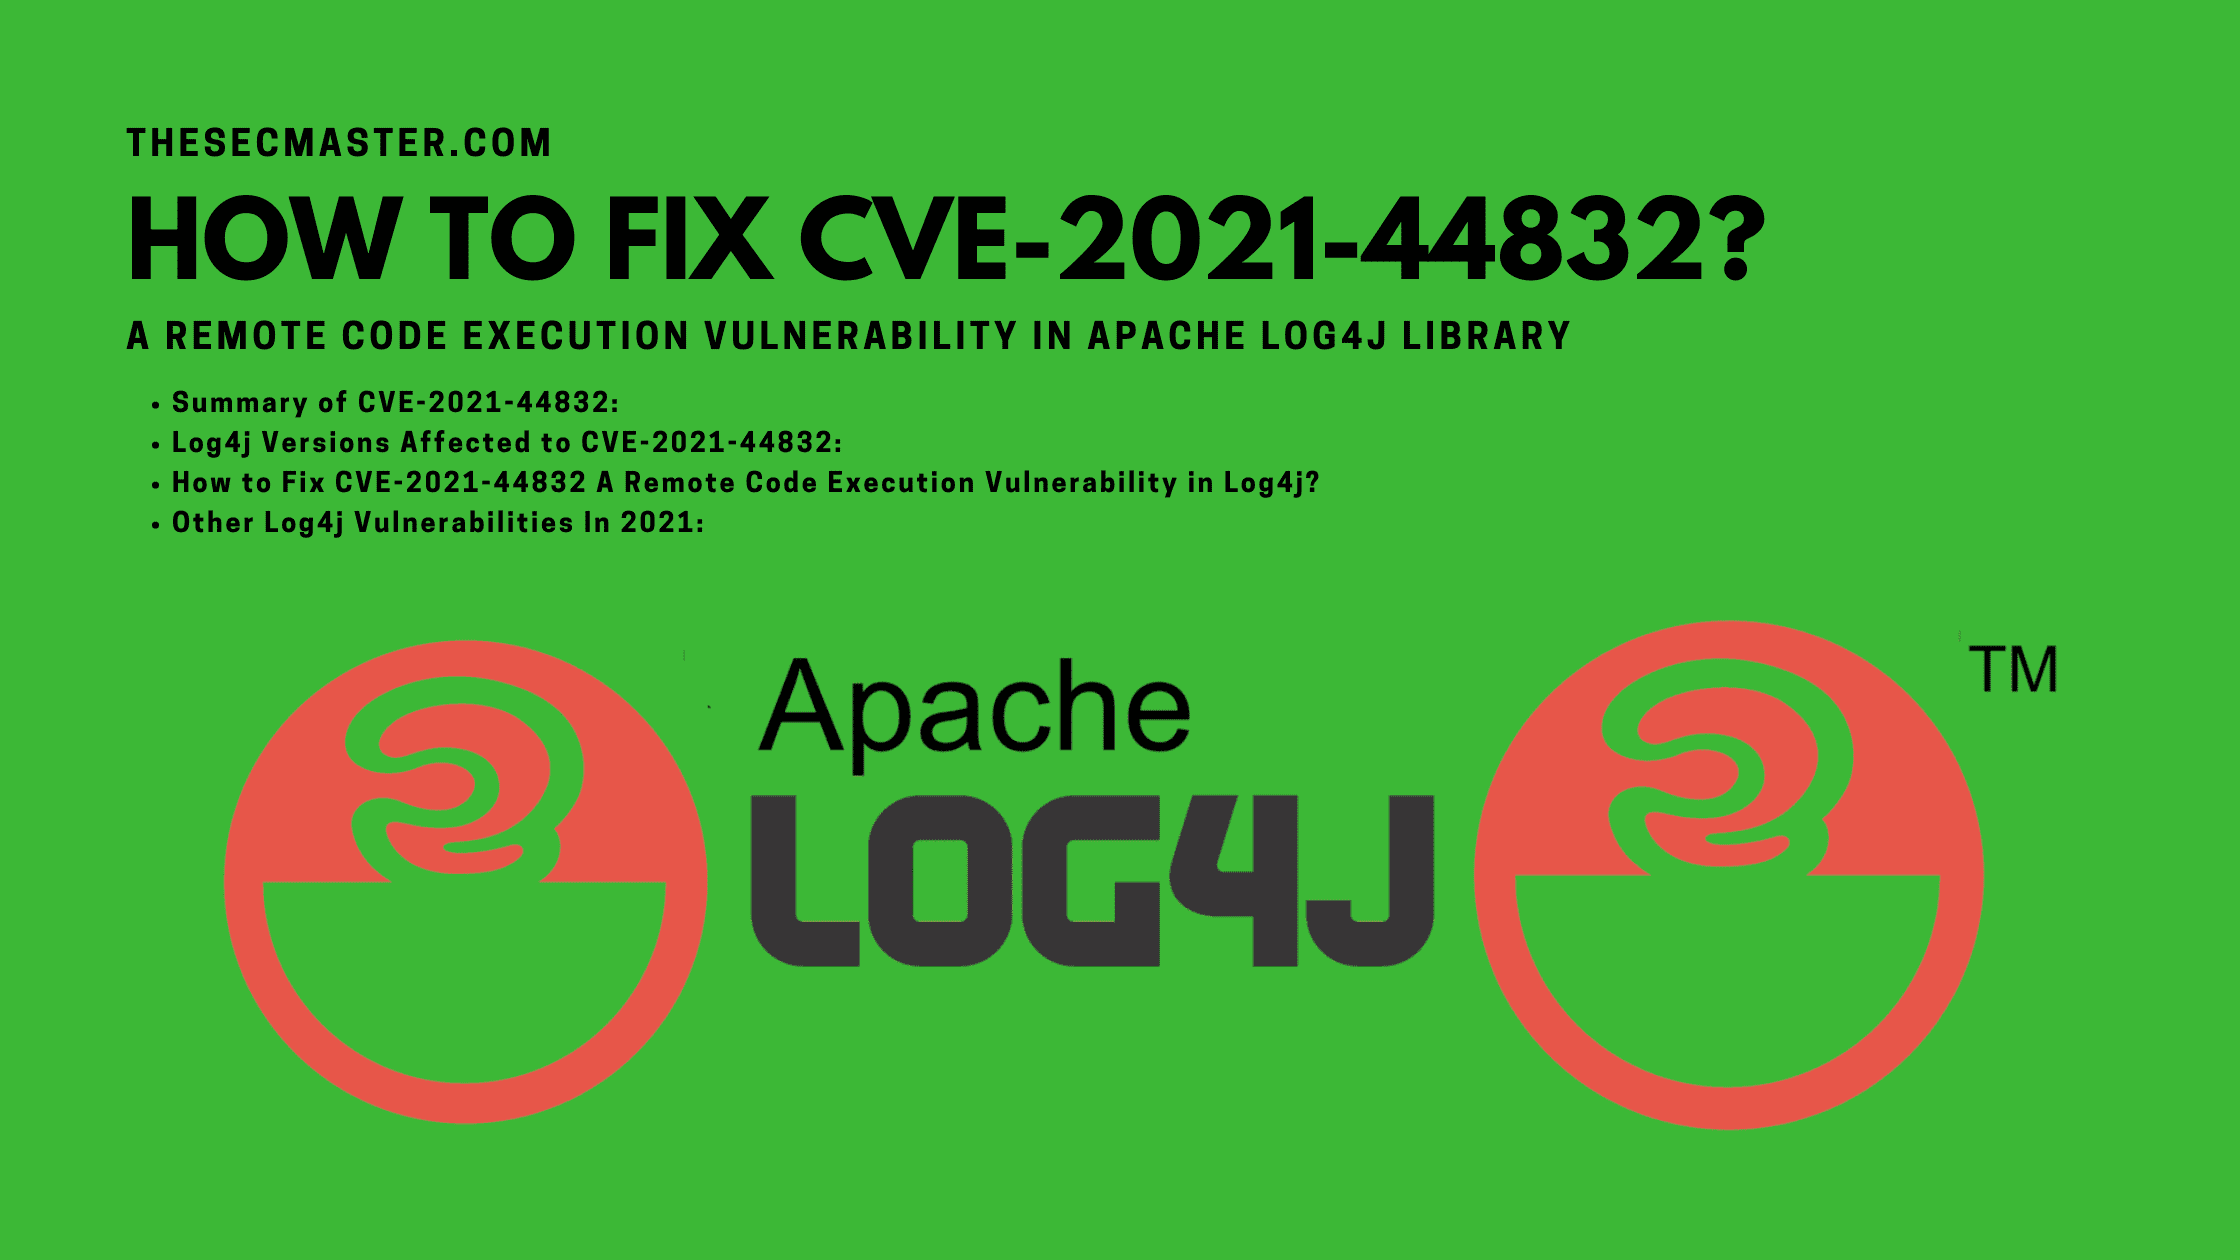 How To Fix Cve 2021 44832 A Remote Code Execution Vulnerability In Apache Log4j Library